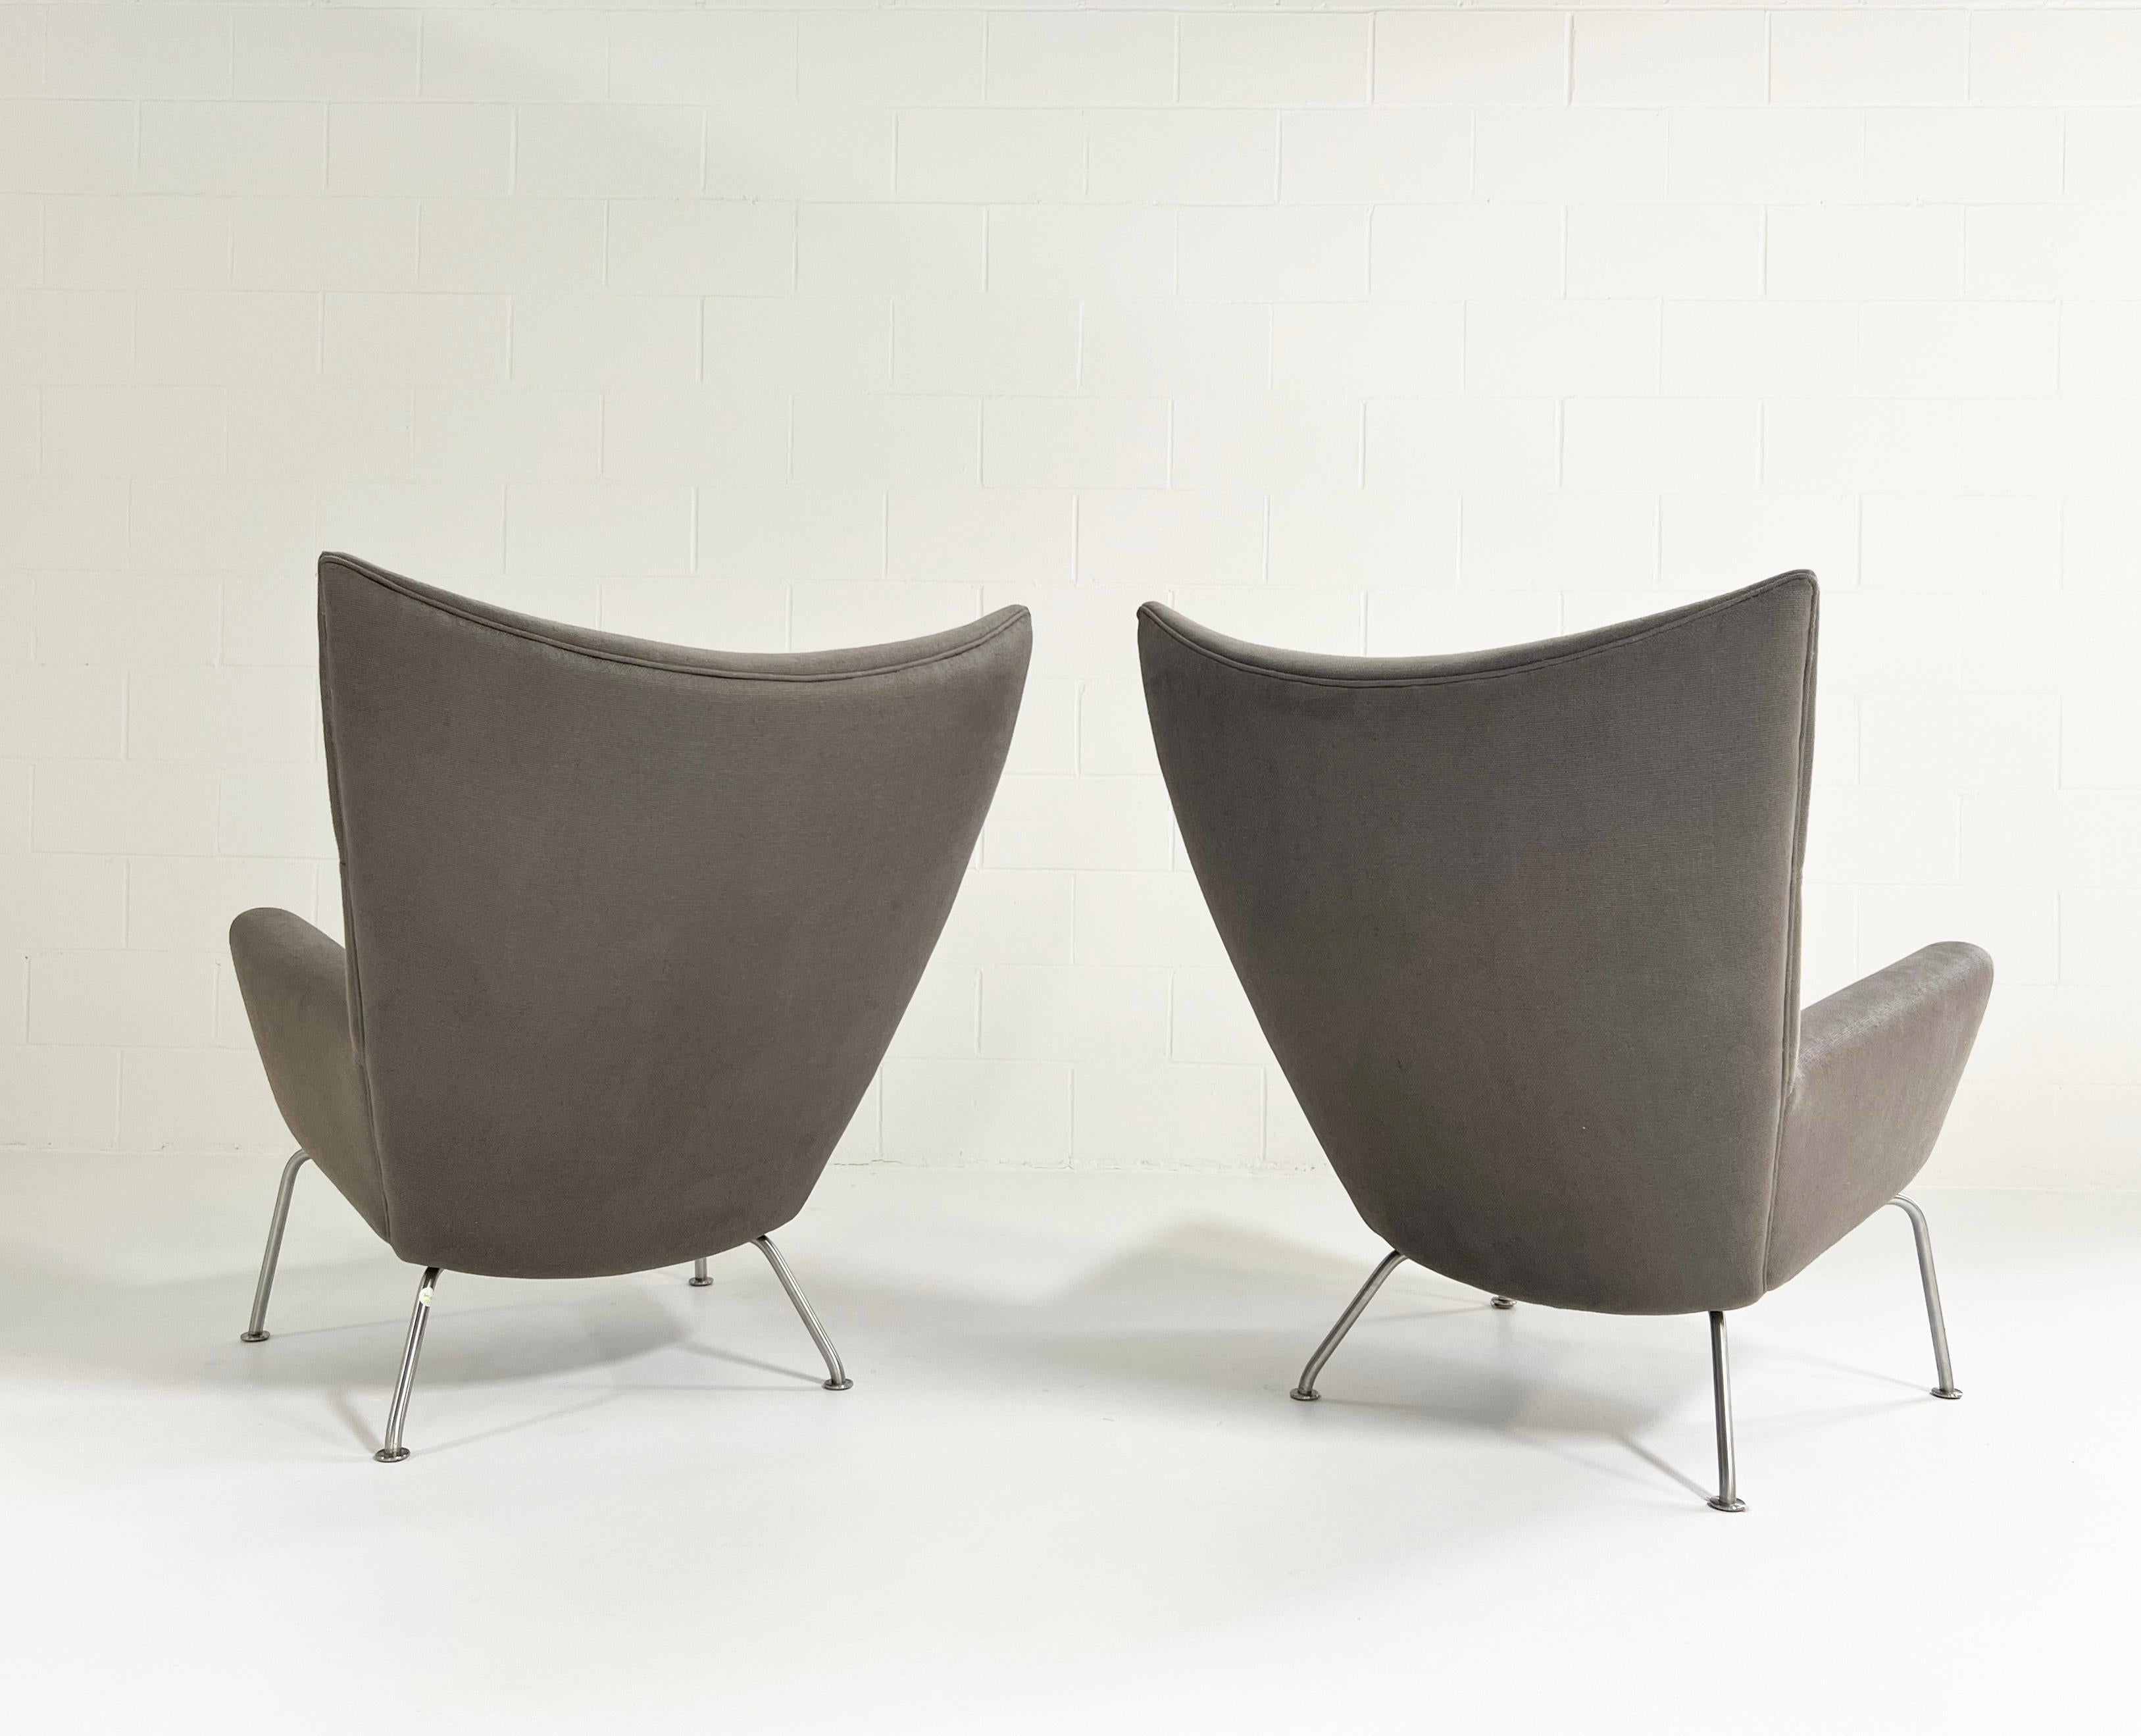 From Carl Hansen & Søn website: The CH445 wing chair is a high-backed, upholstered armchair with a stainless steel frame. Hans J. Wegner’s expertise for sculptured design and demand for quality craftsmanship is clearly expressed in this dramatic